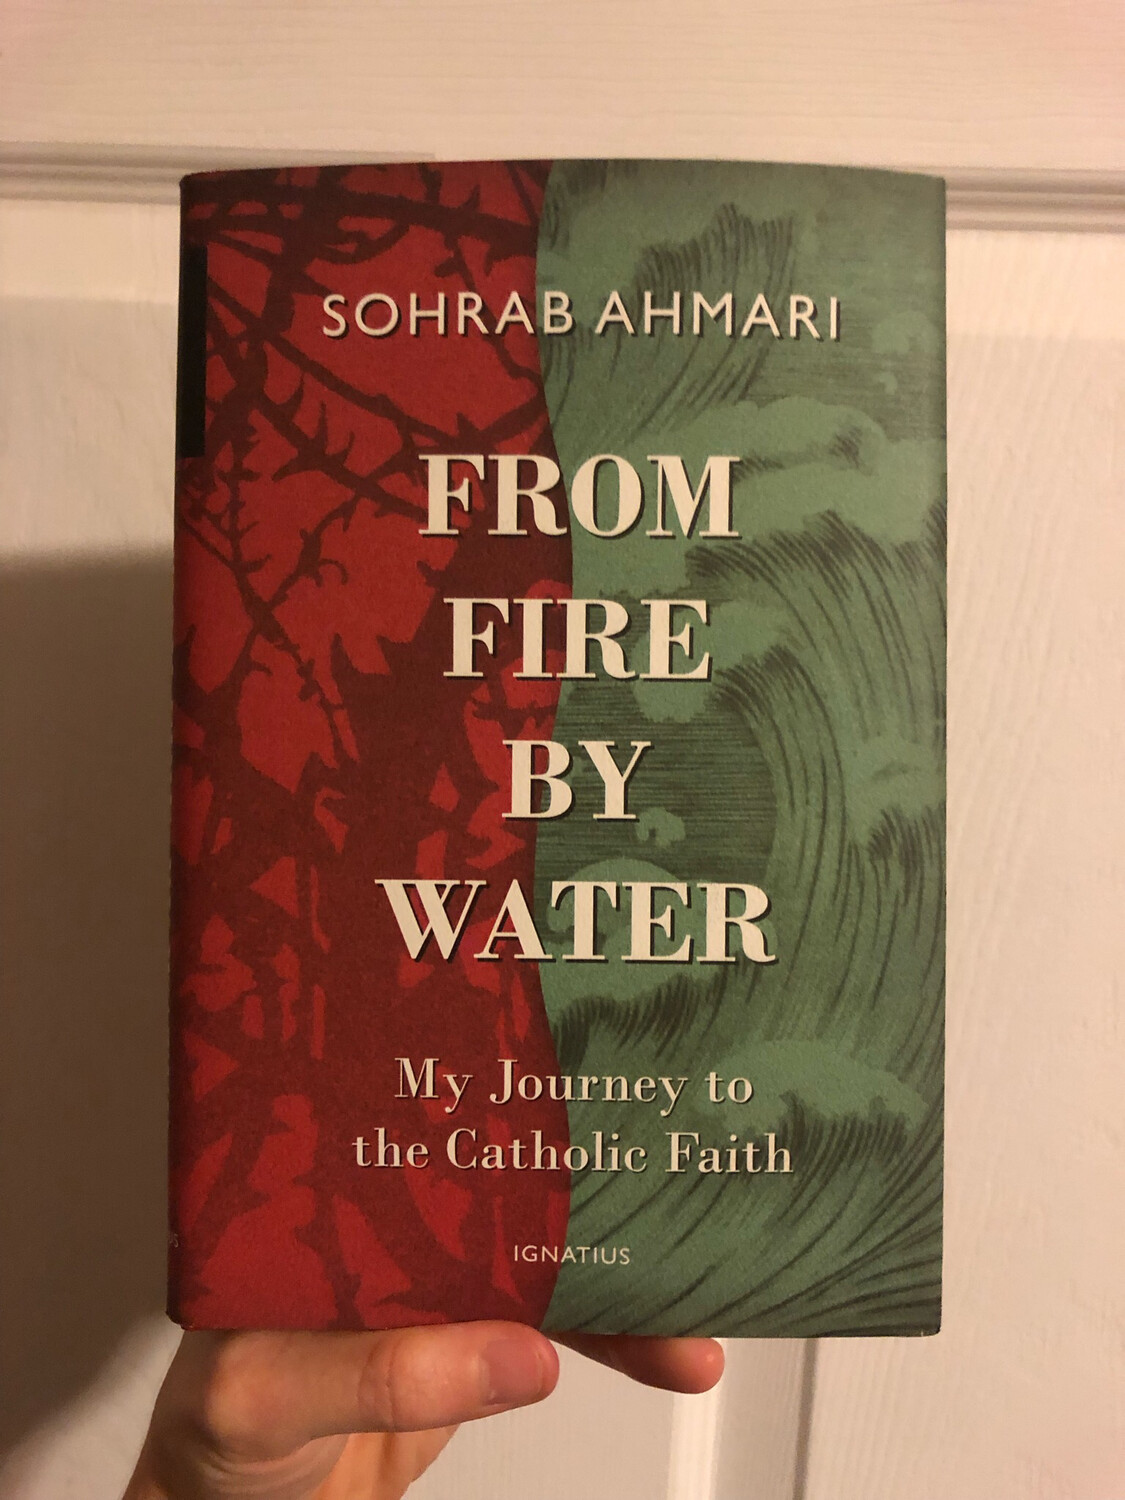 From Fire By Water by Sohrab Ahmari